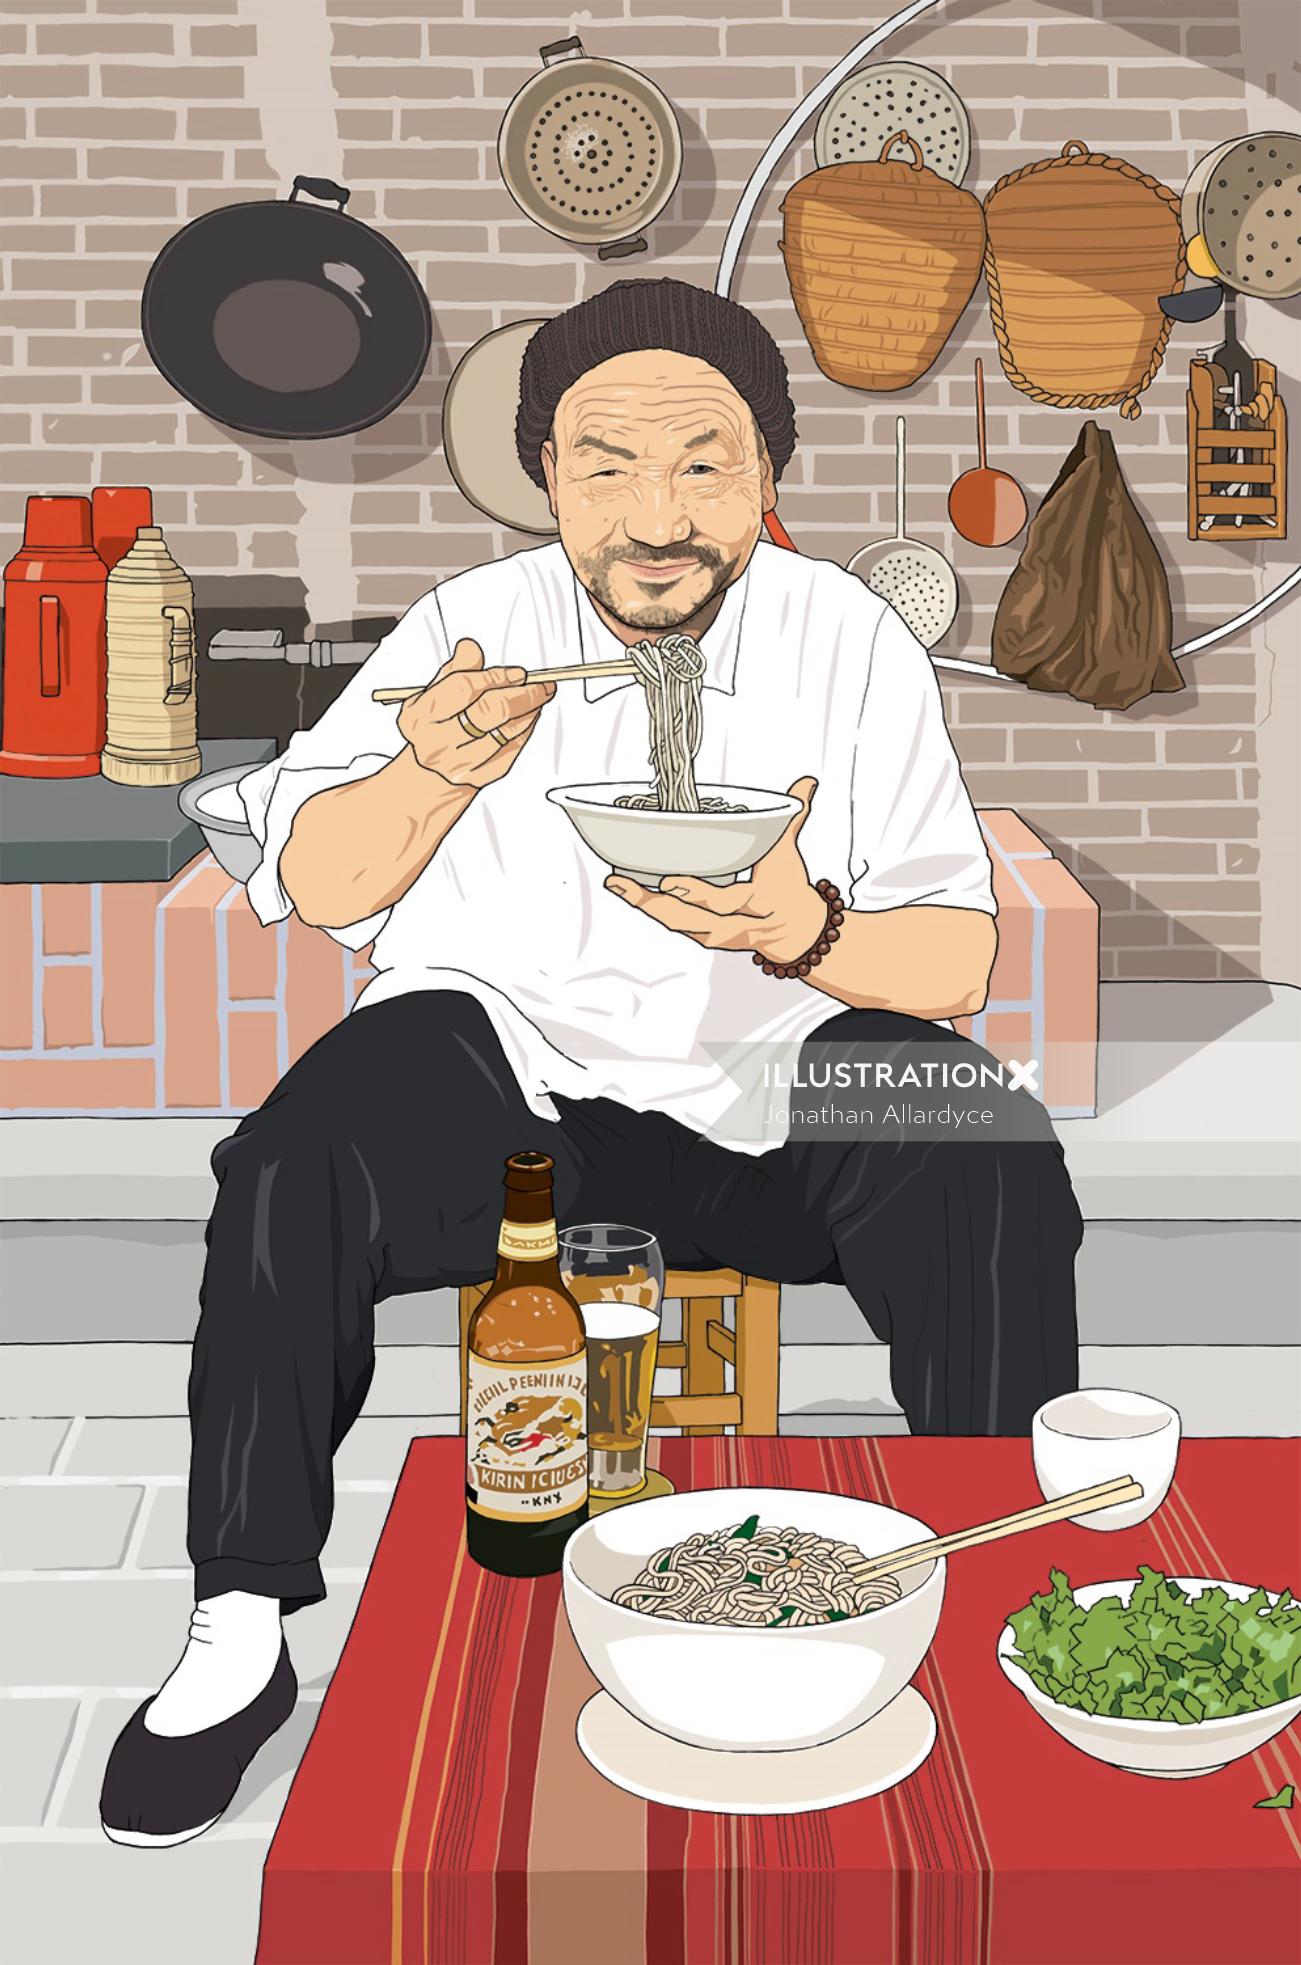 Illustration of Chinese man eating noodles